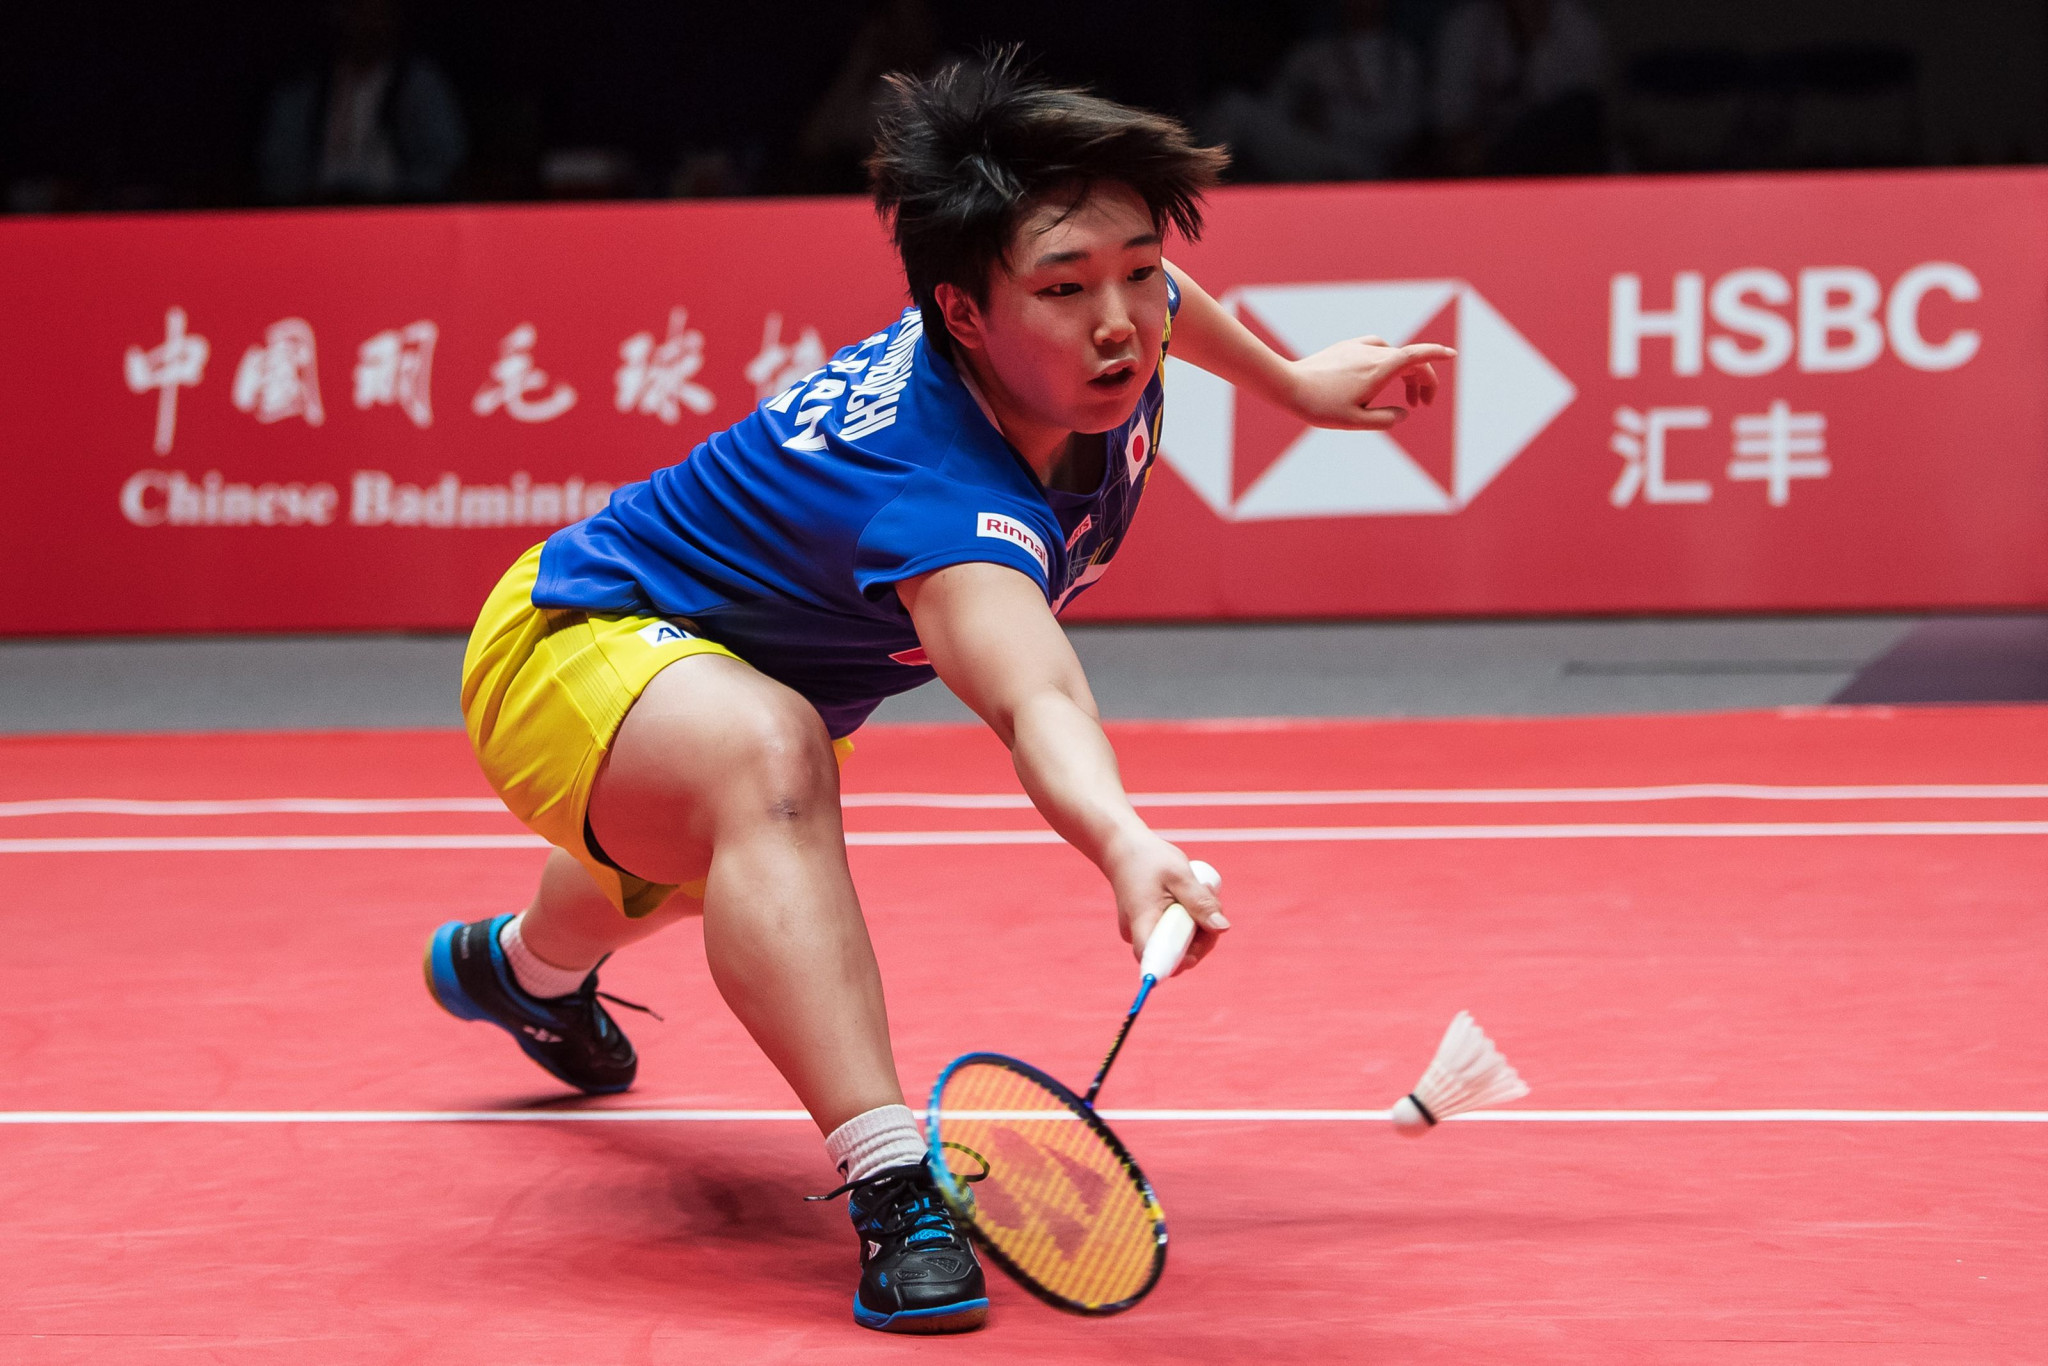 Yamaguchi out to claim women's singles title at BWF Thailand Masters